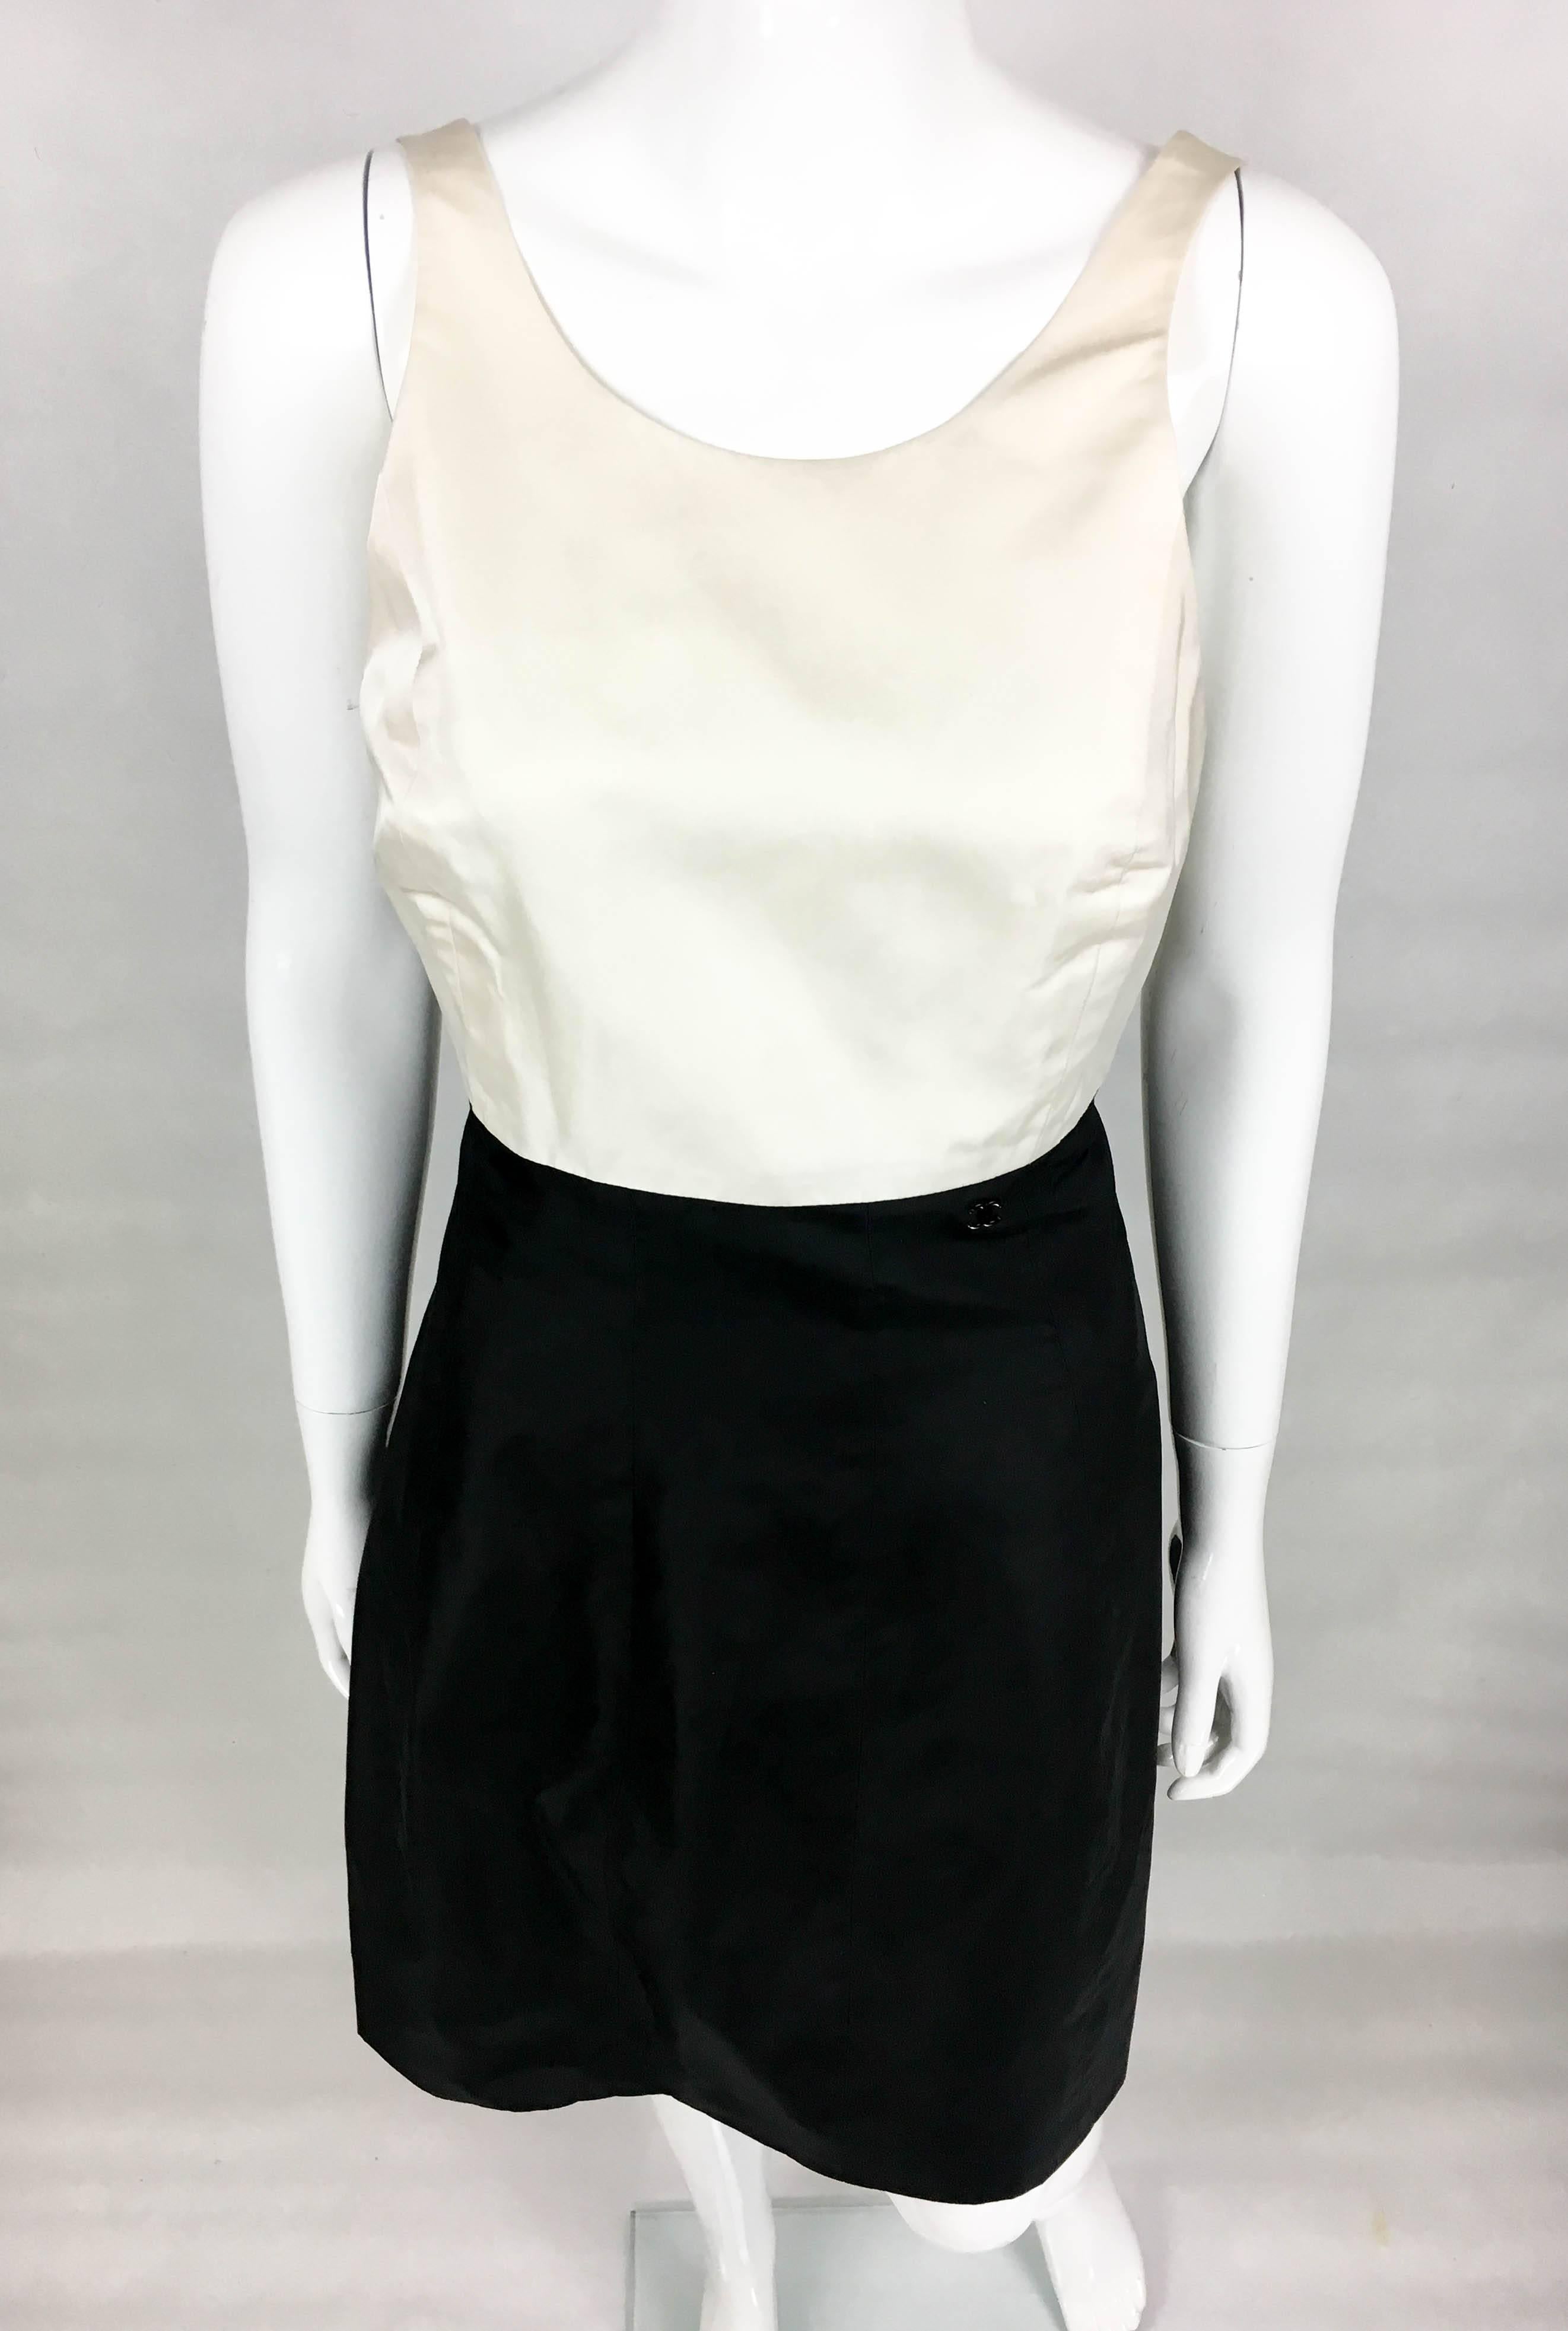 Women's 2006 Chanel Black and White Silk Cocktail Dress For Sale